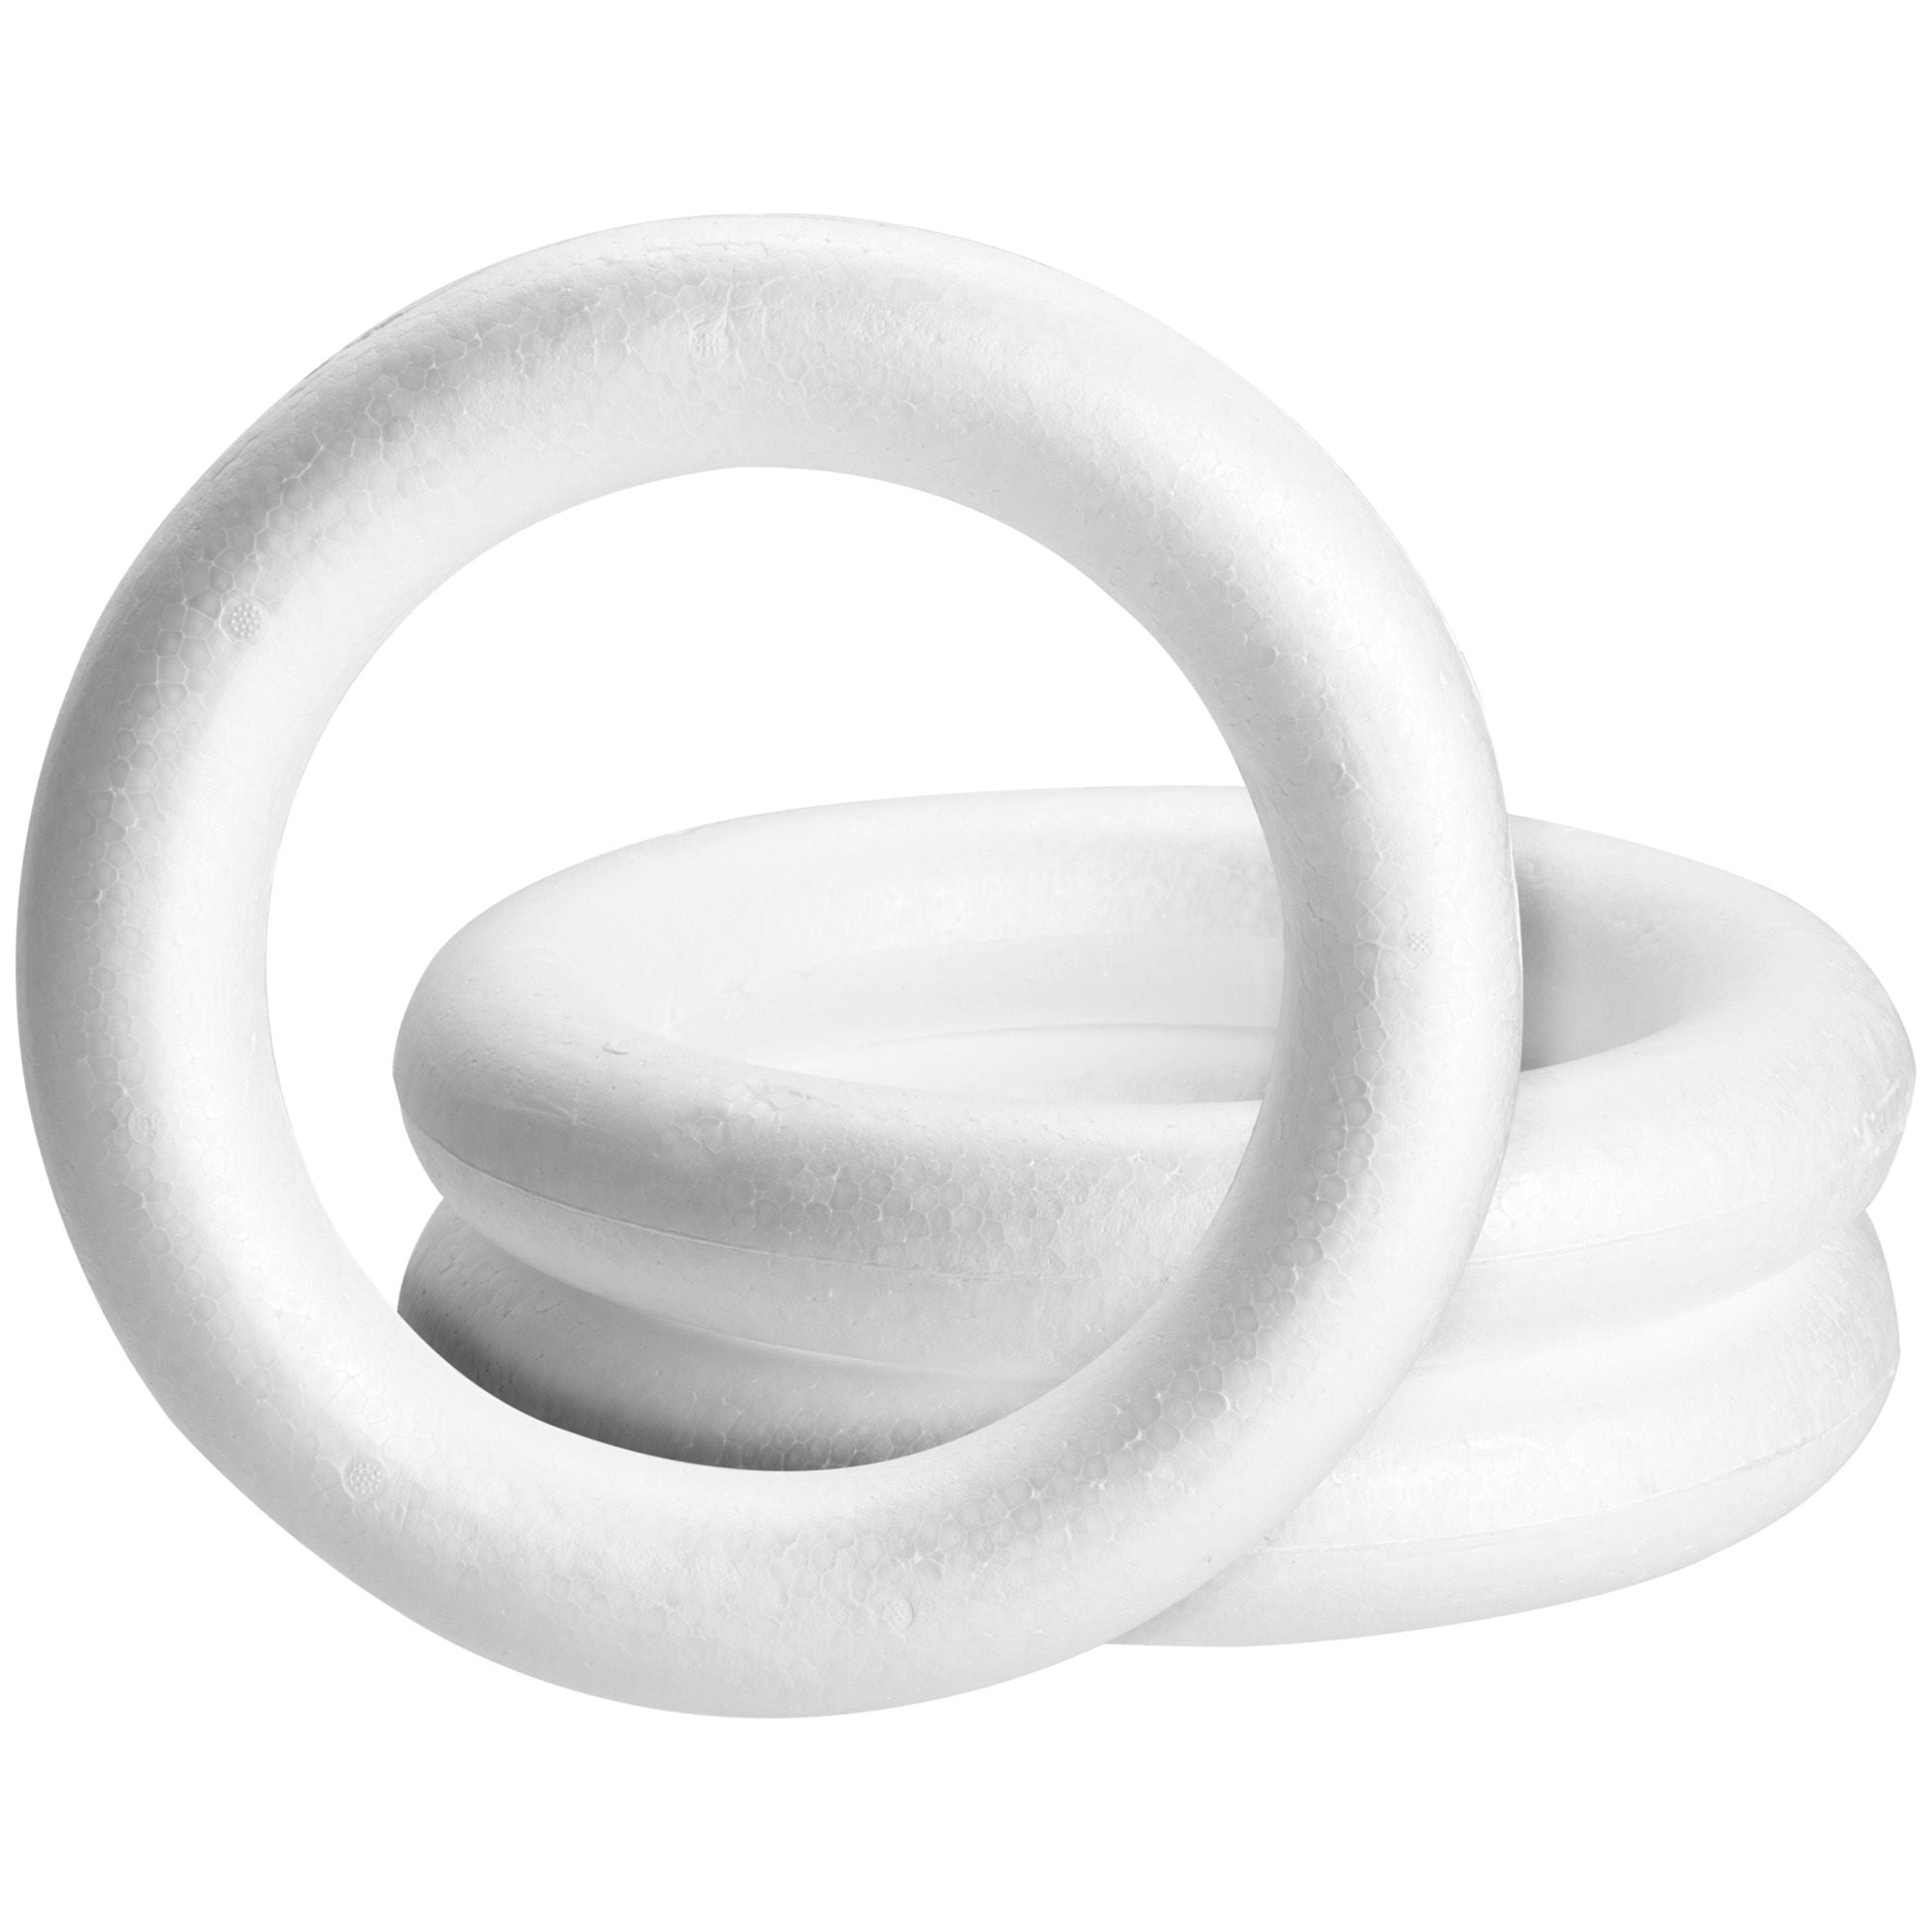 6 Pack Foam Wreath Forms for DIY Crafts, 8 Inch Polystyrene Rings, PACK -  Baker's